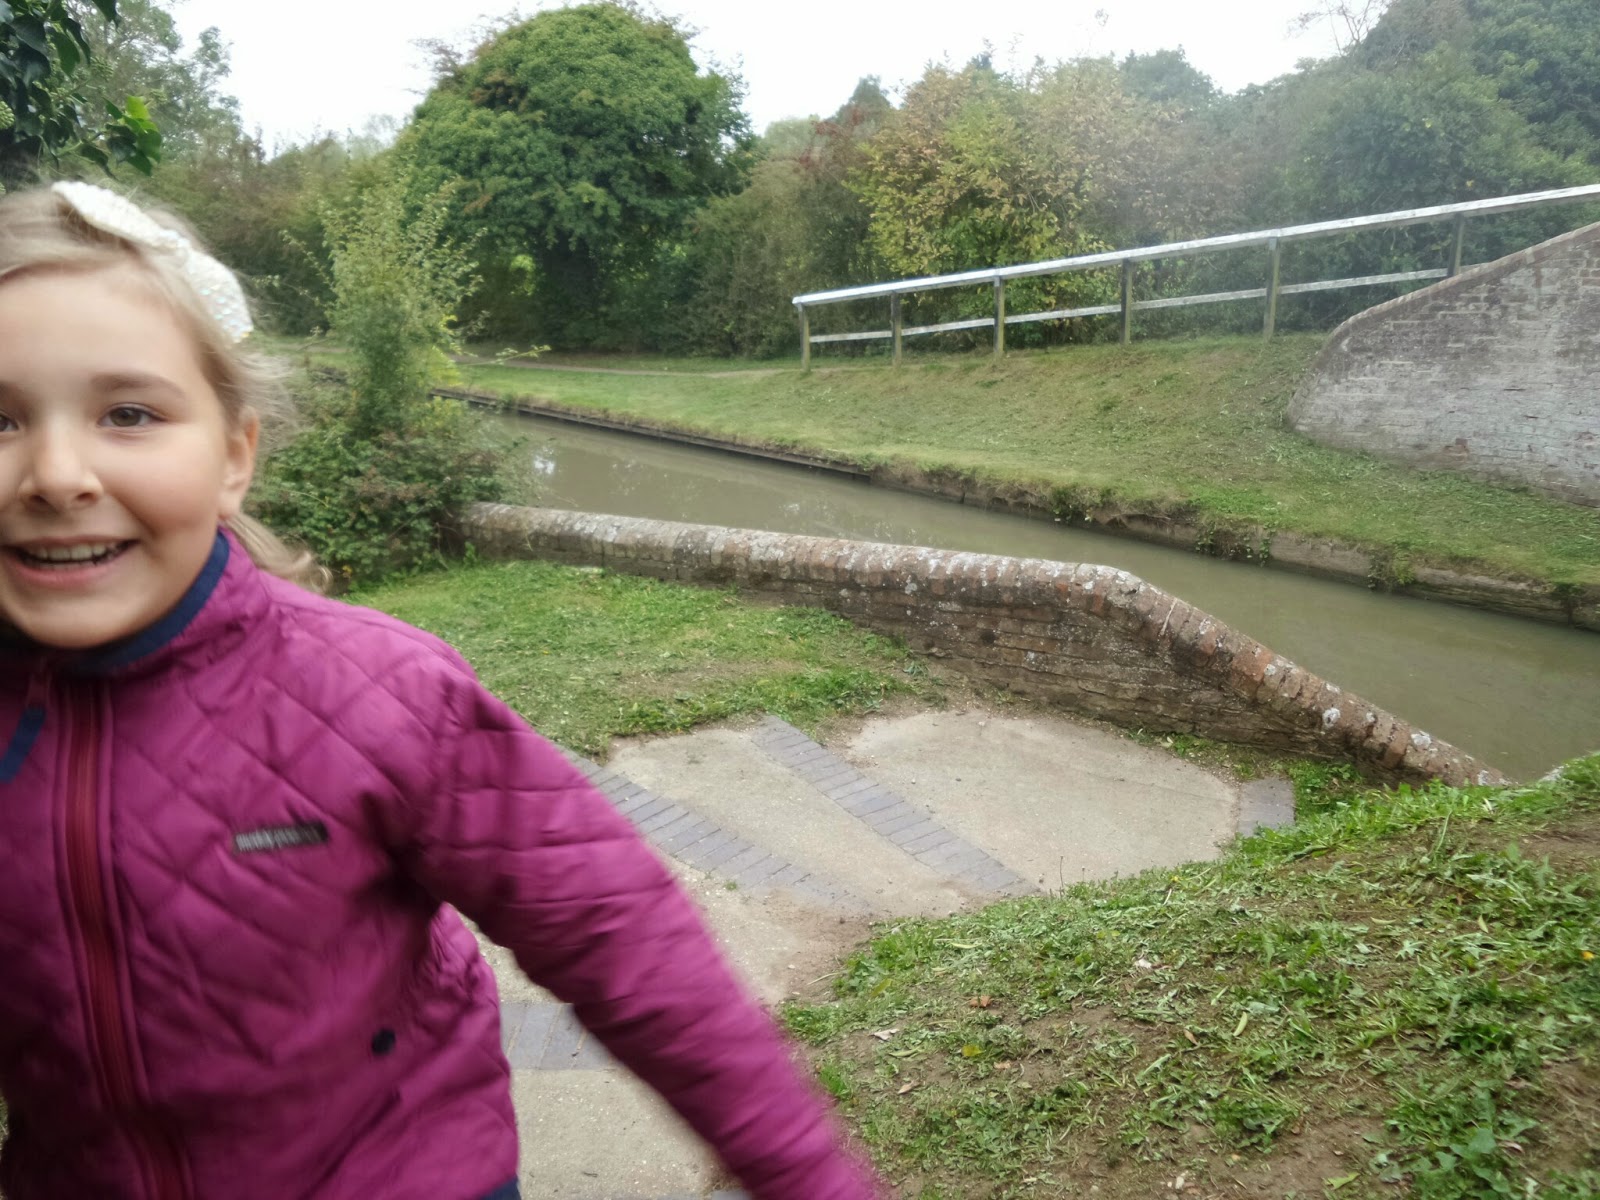 Top Ender bounding up the Canal Towpath in her Muddy Puddles jacket